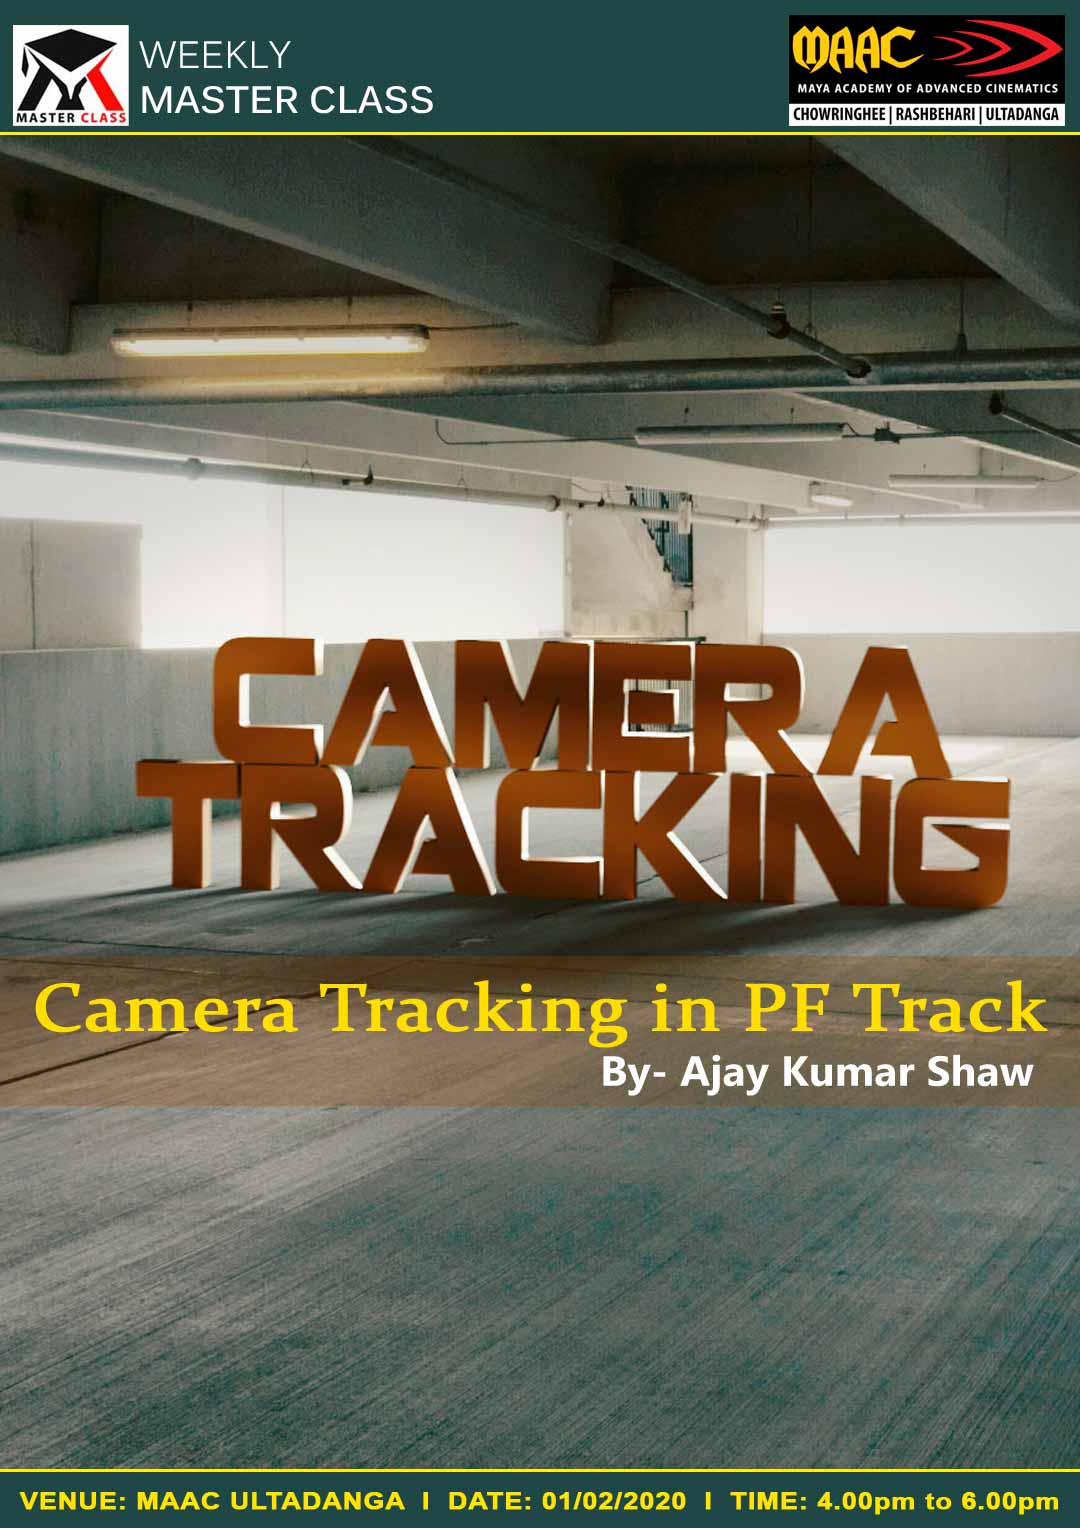 Weekly Master Class on Camera Tracking  in PF Track